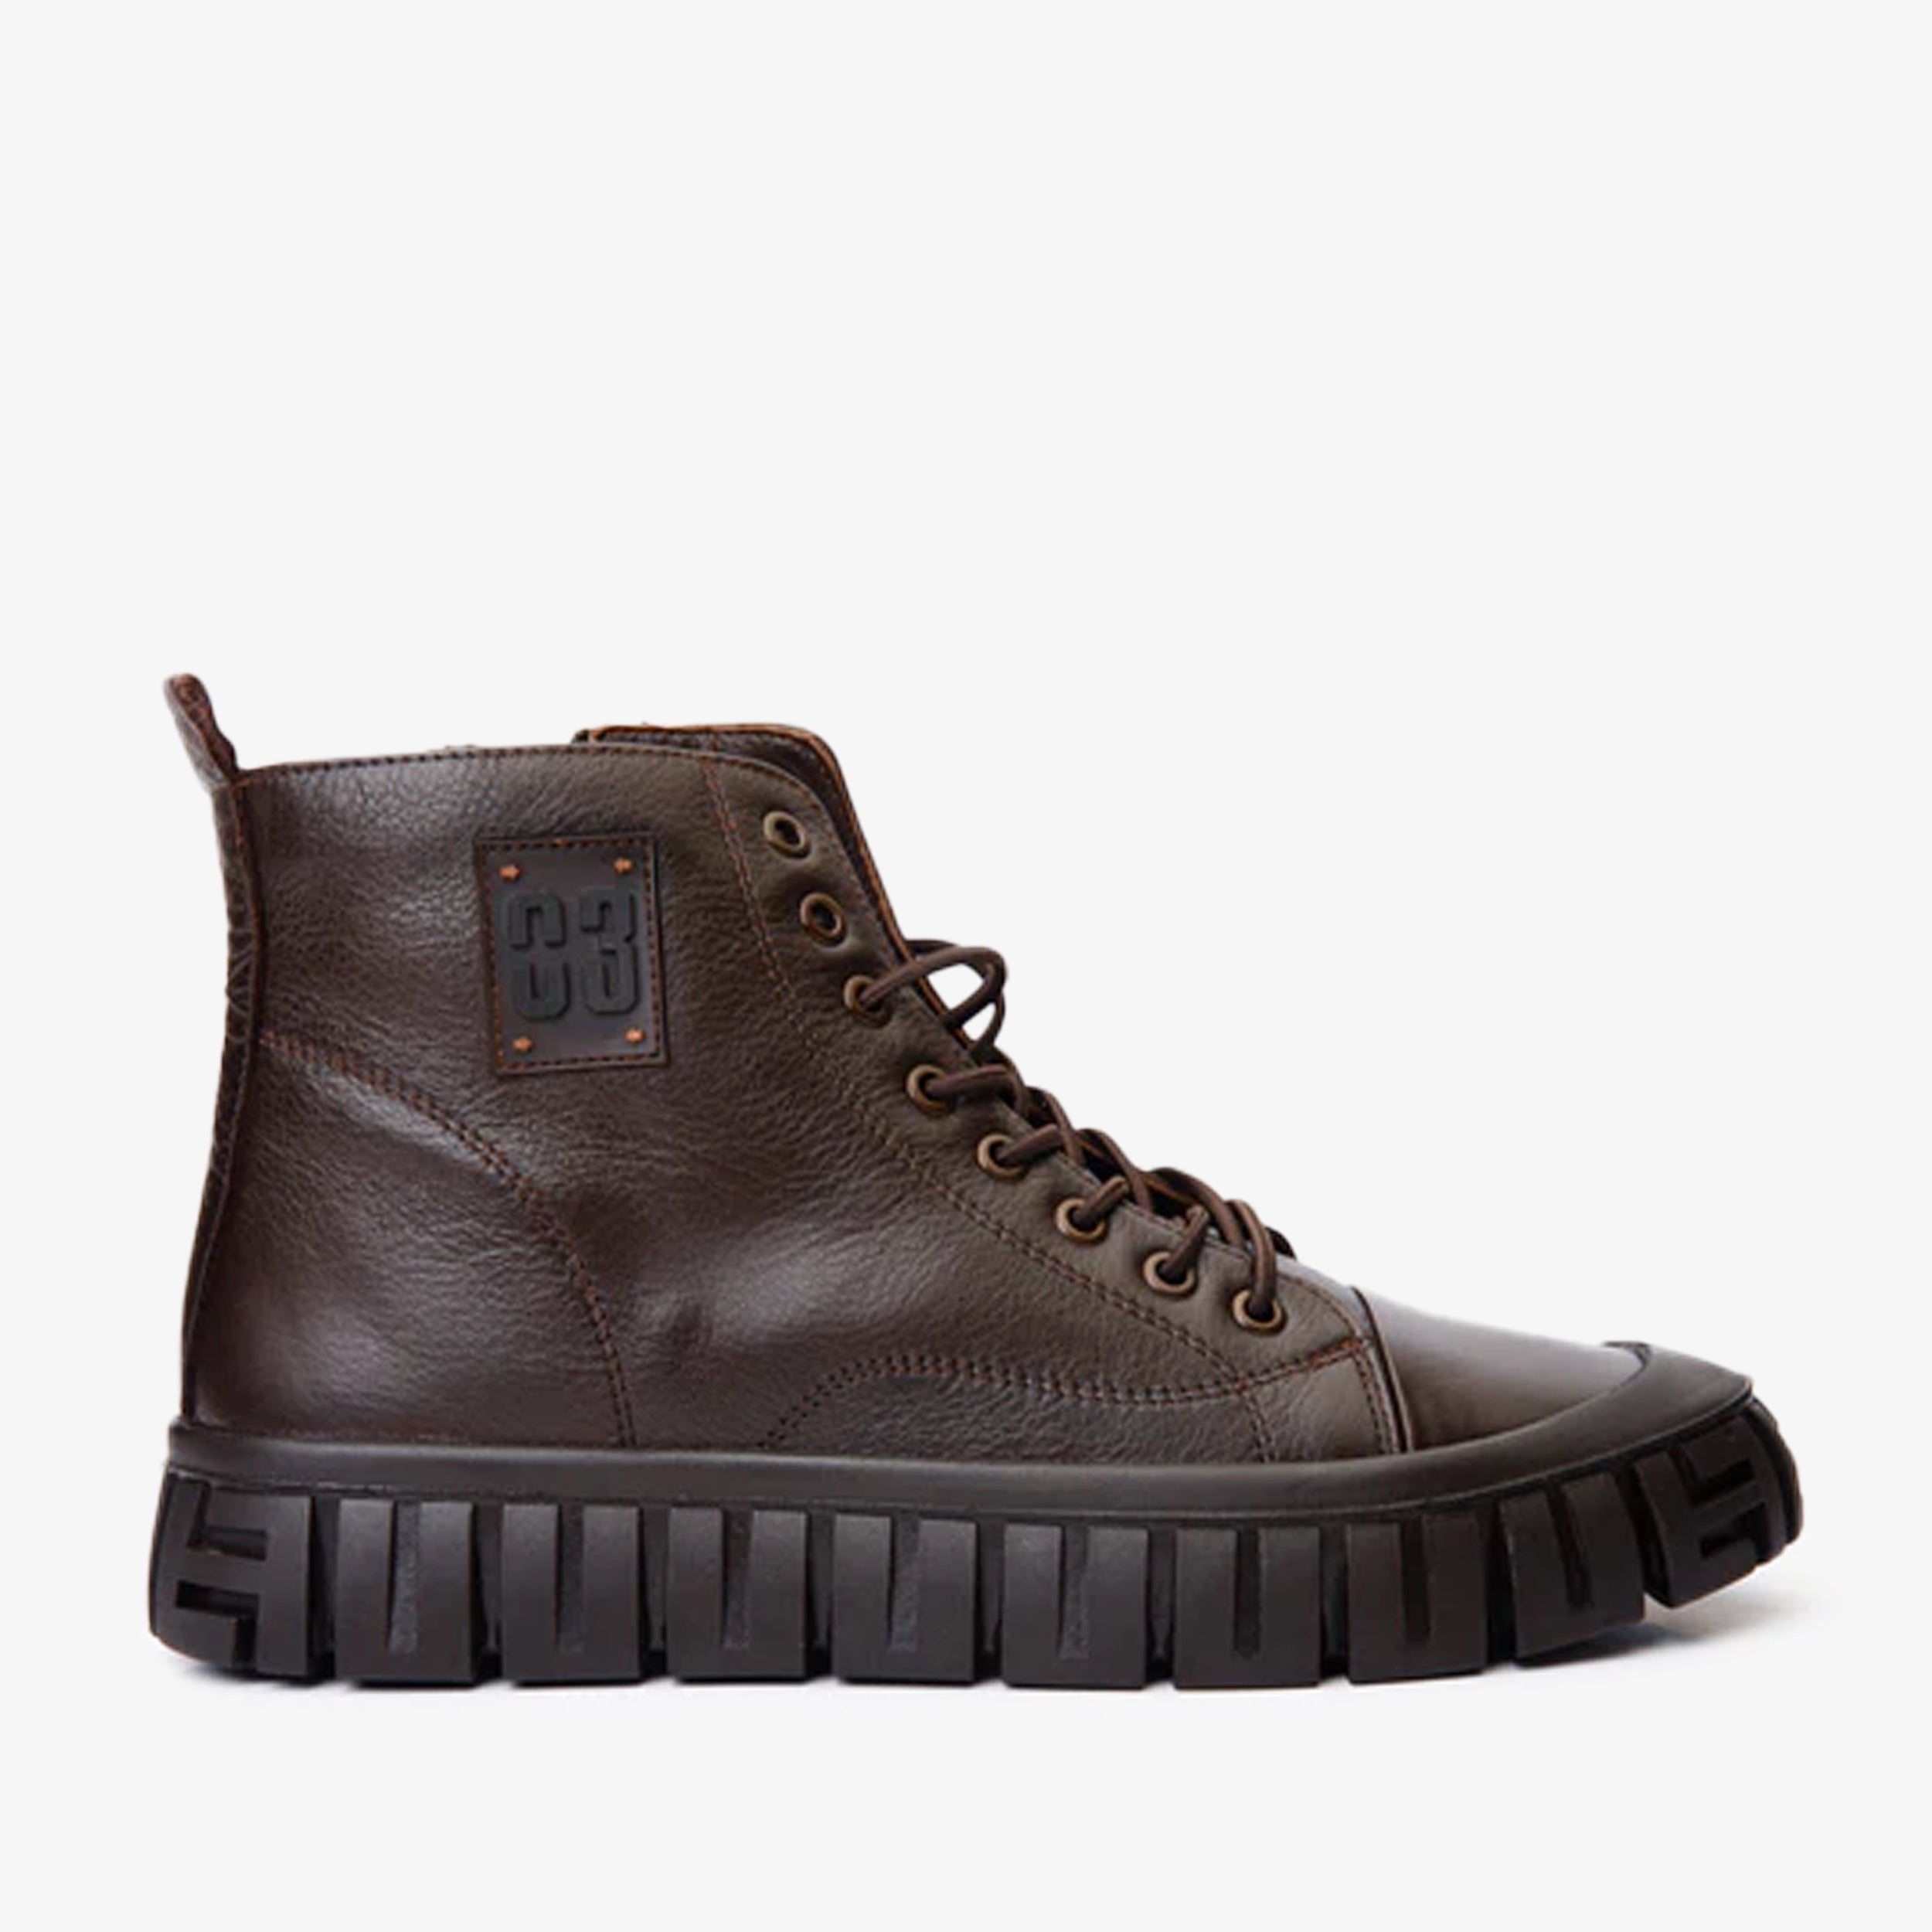 The Taco Brown Leather Casual Lace-Up Men Boot with a Zipper